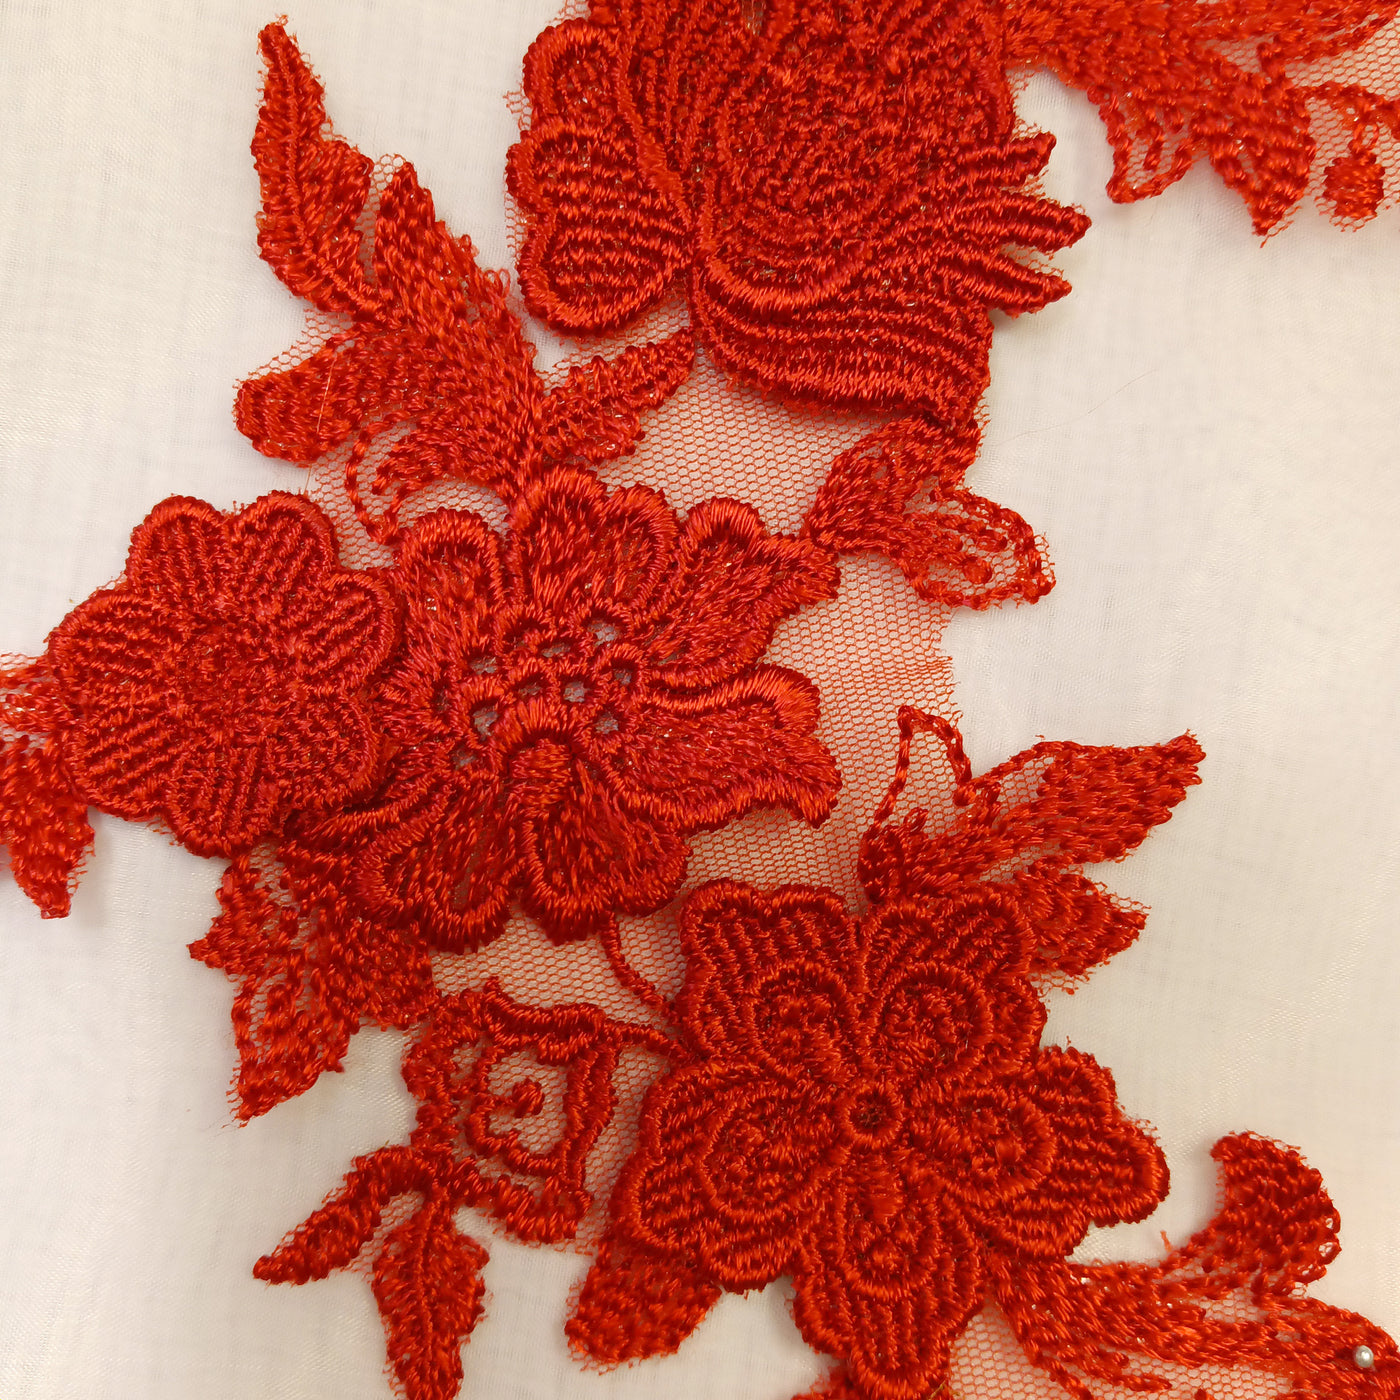 Embroidered Red Applique with 3D Flowers on 100% Polyester Net Mesh.